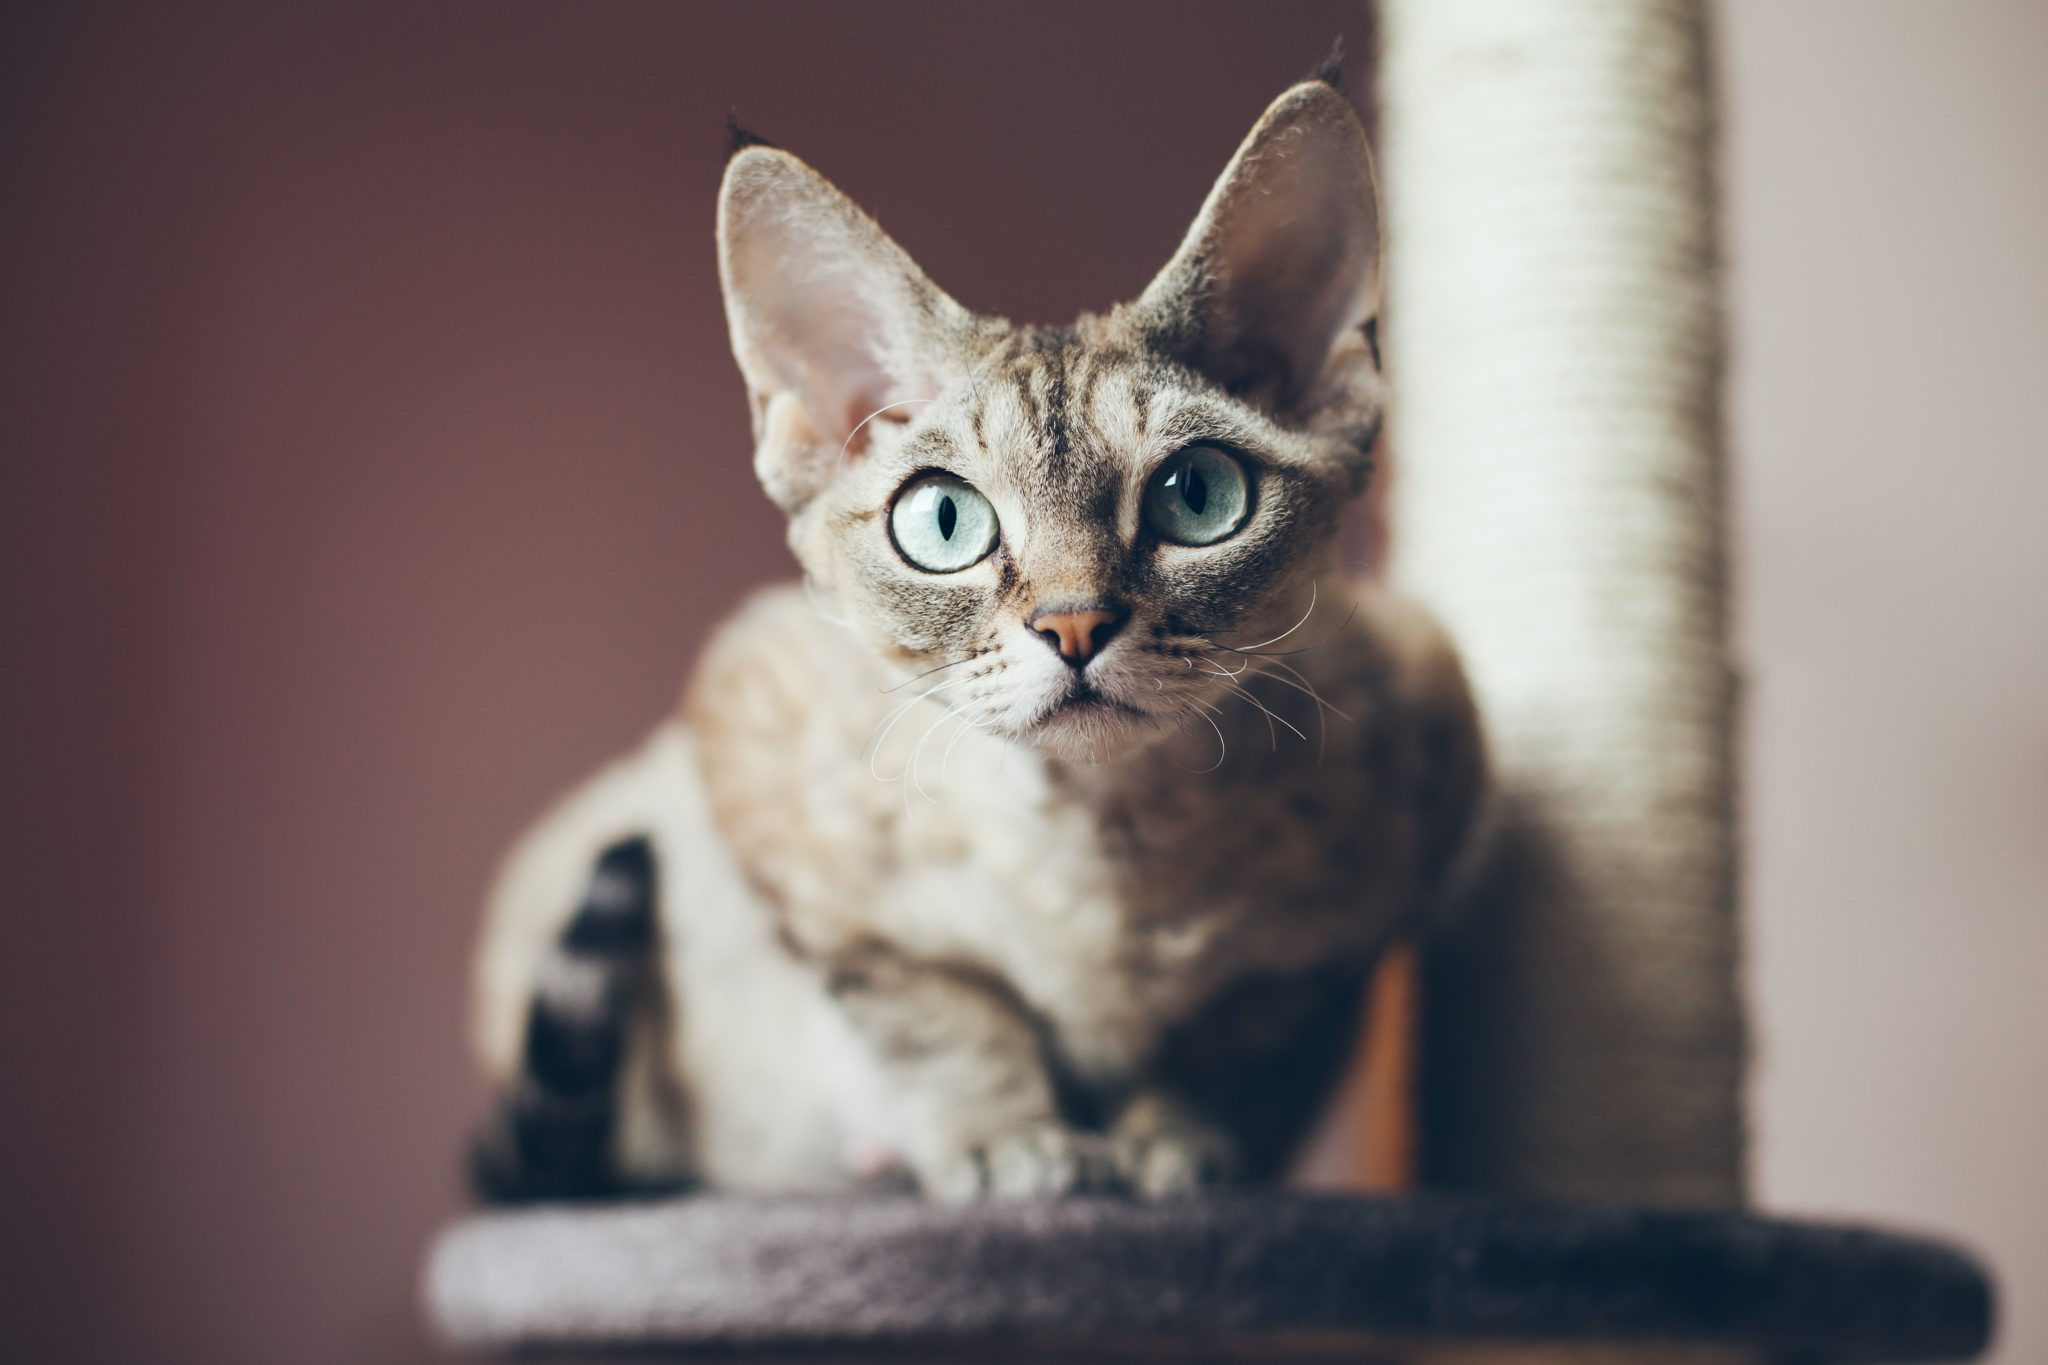 Portrait of a beautiful Devon Rex cat looking at the camera, natural light shoot, nice shadows. Cat uses scratching post